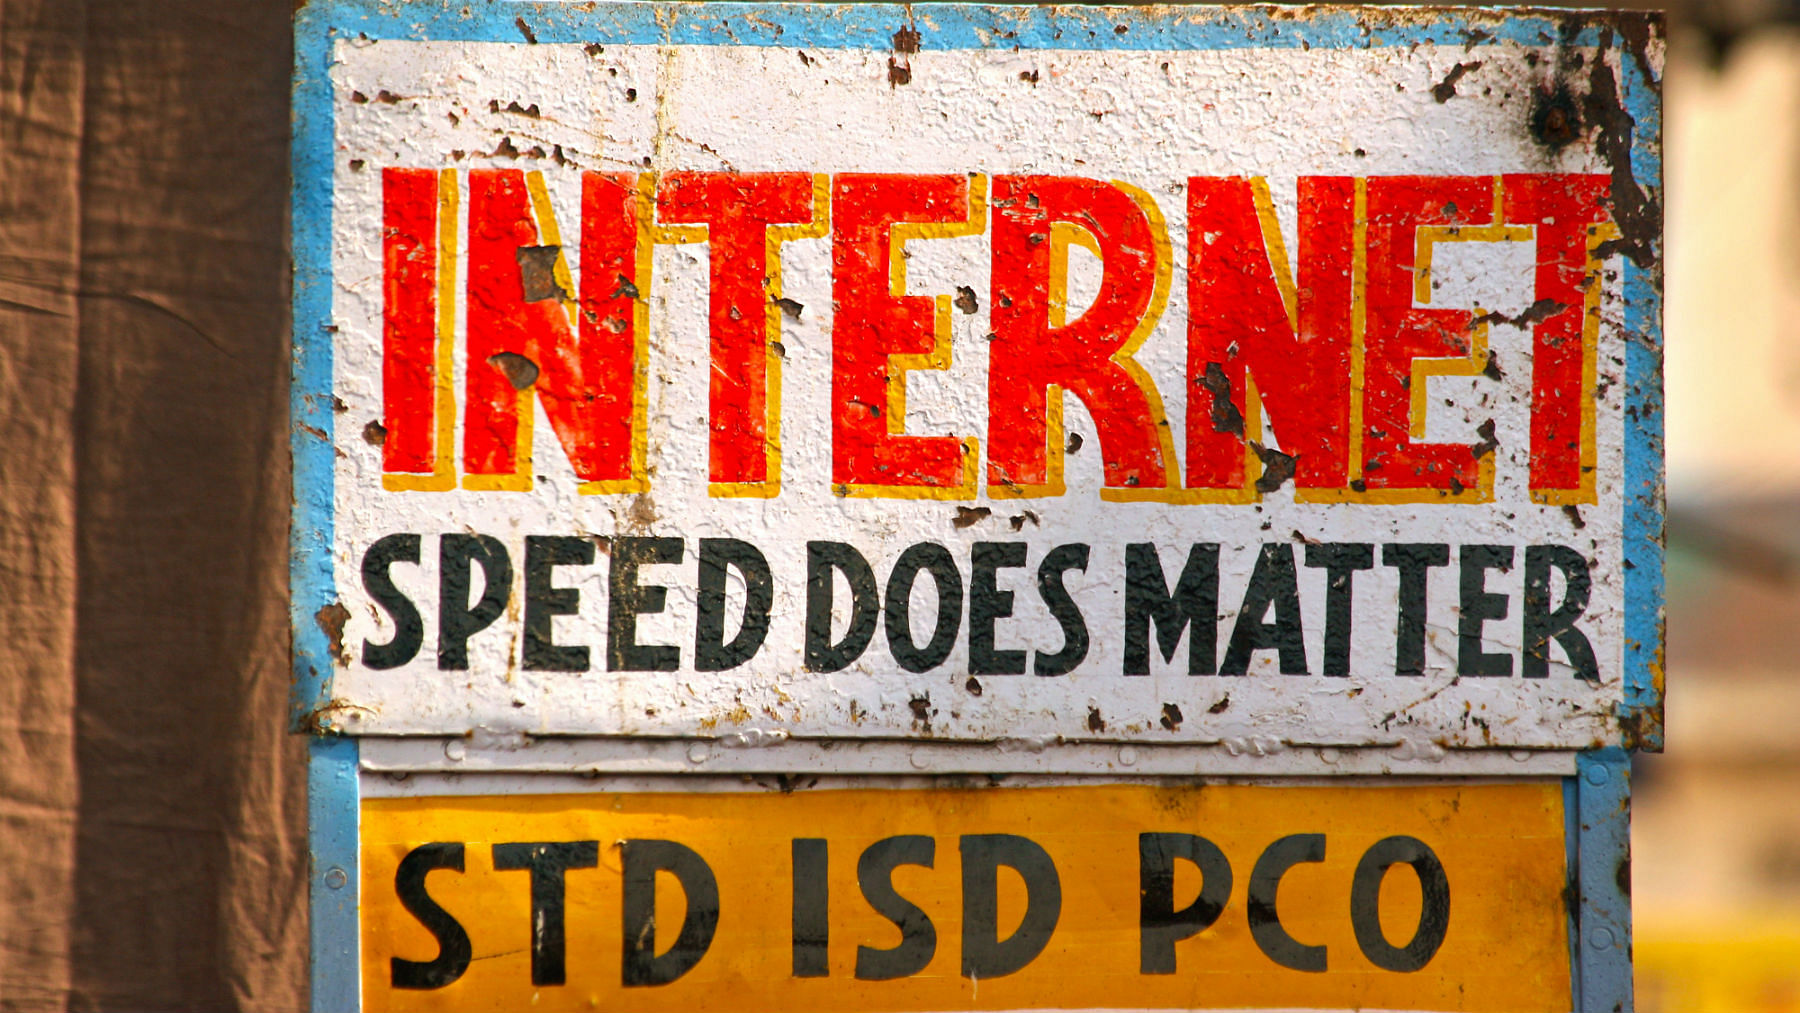 512Kbps ranks as the average internet speed in India. (Photo: iStock)